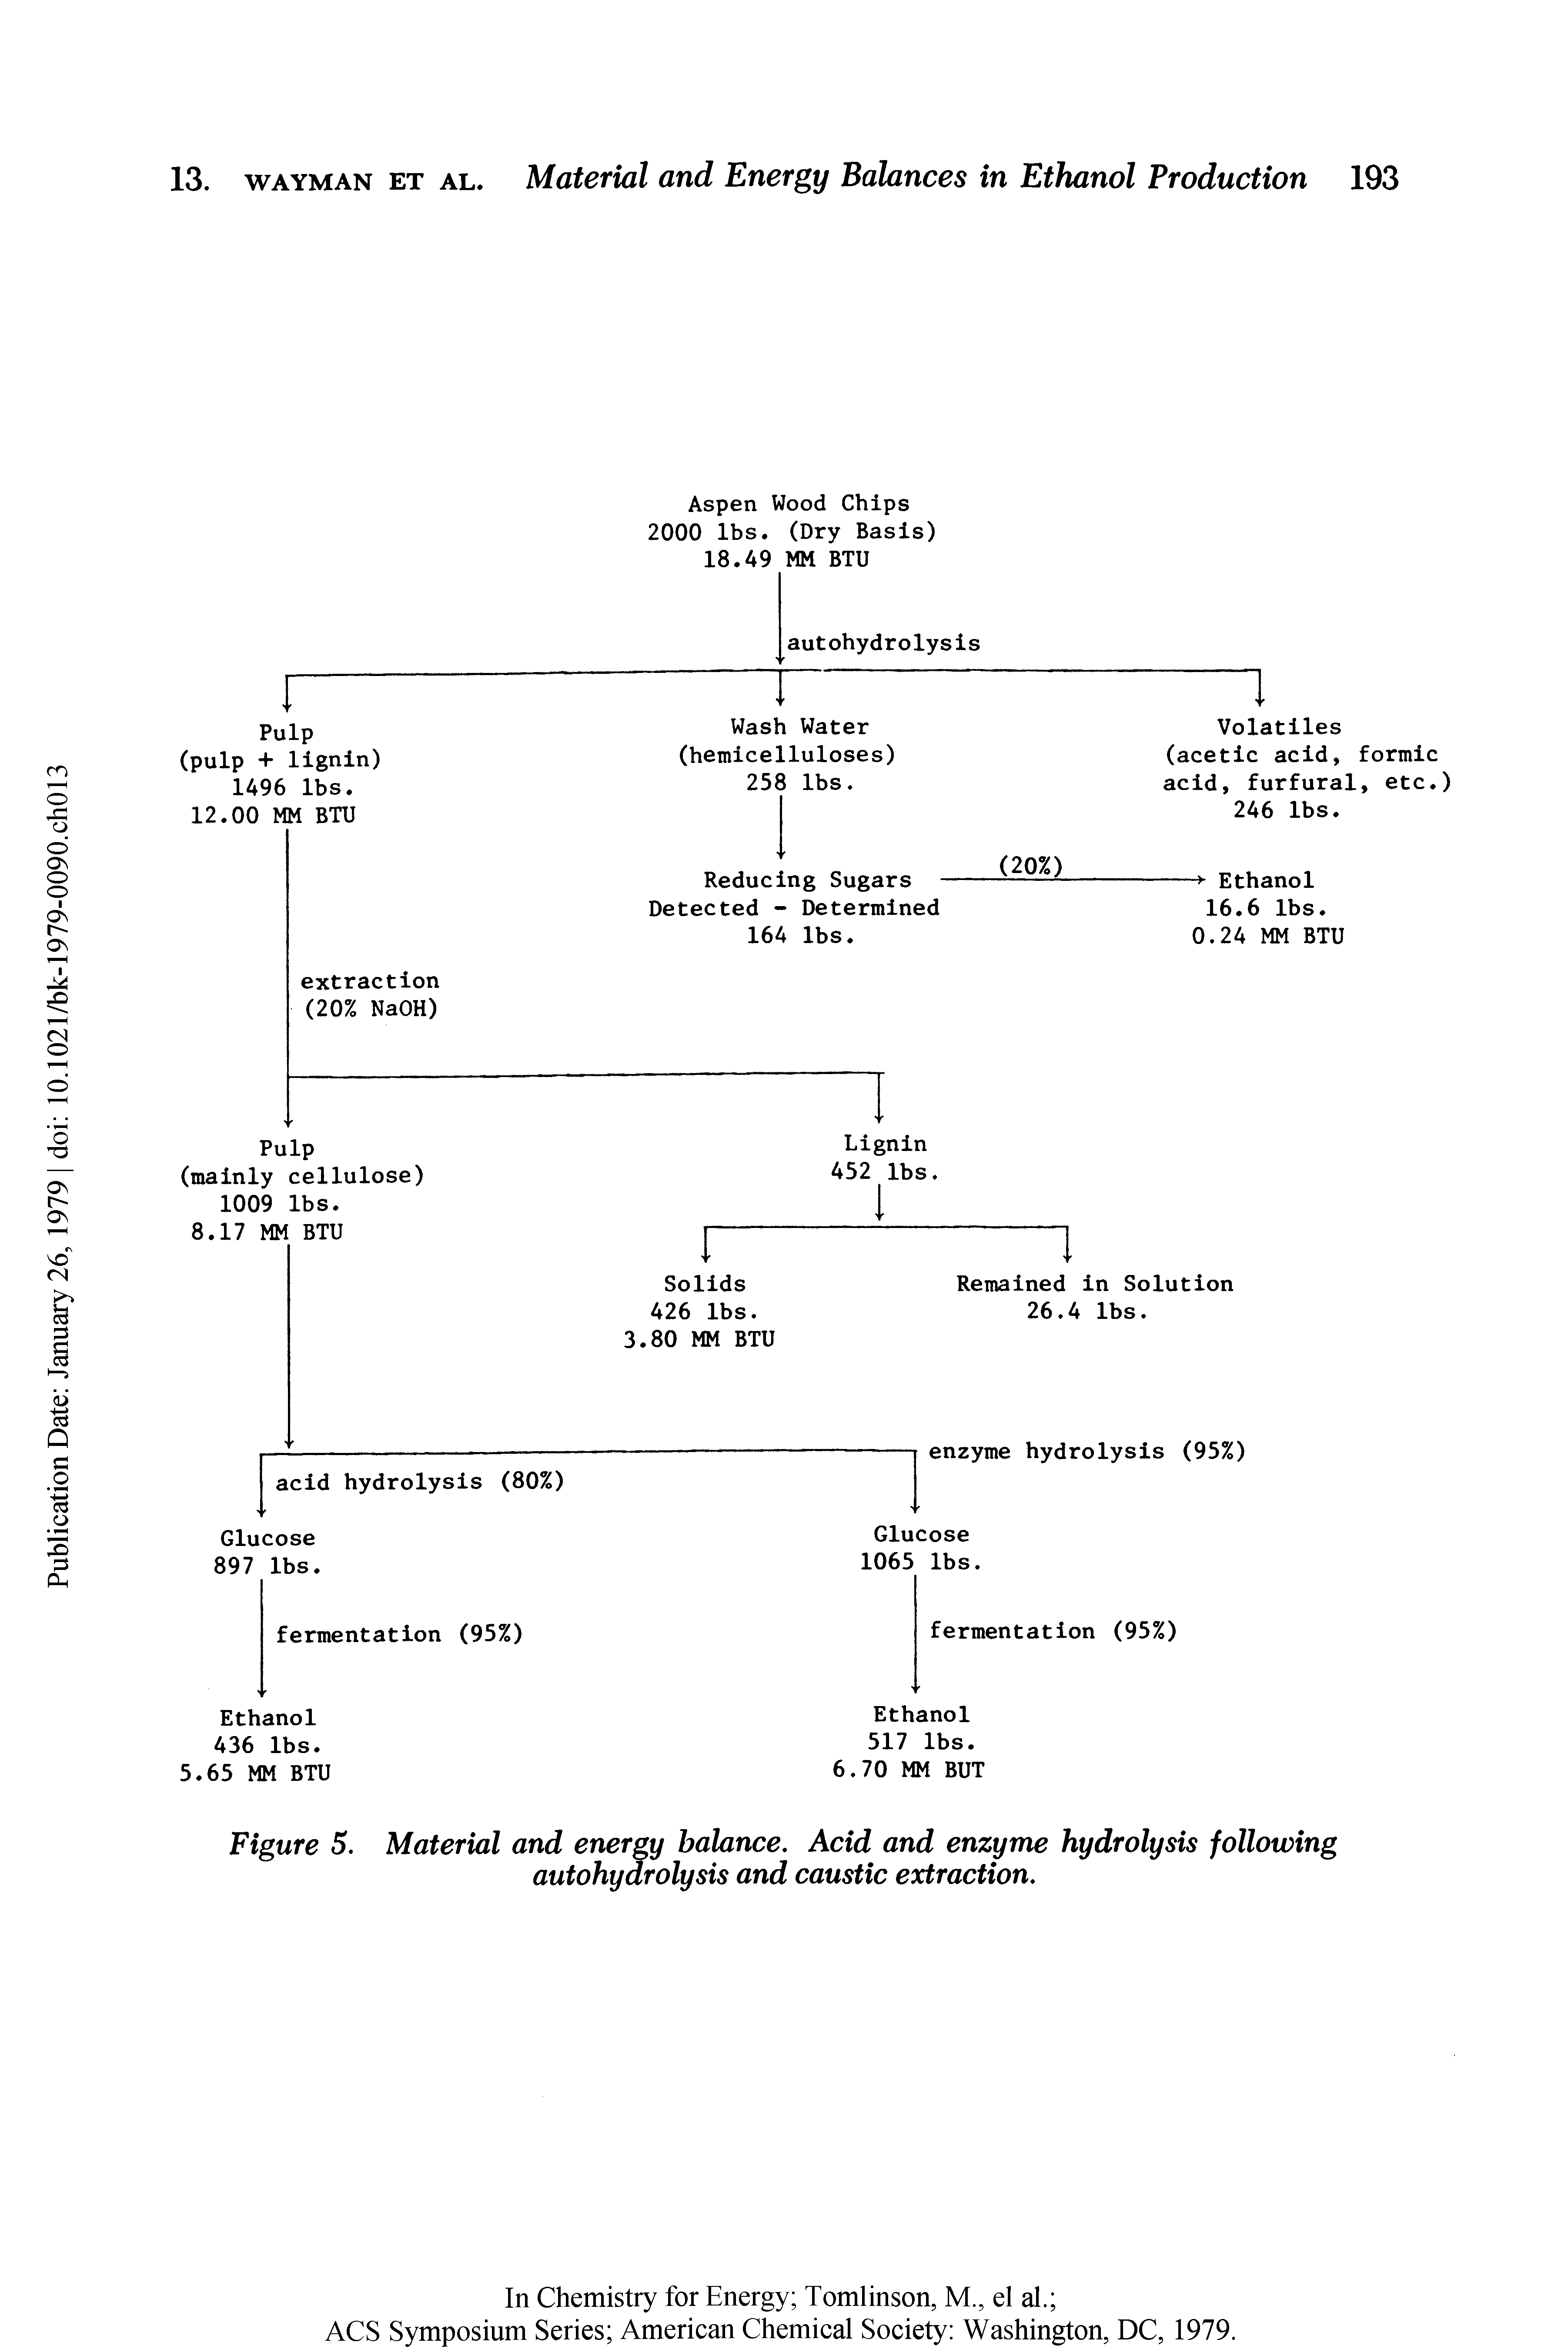 Figure 5. Material and energy balance. Acid and enzyme hydrolysis following autohydrolysis and caustic extraction.